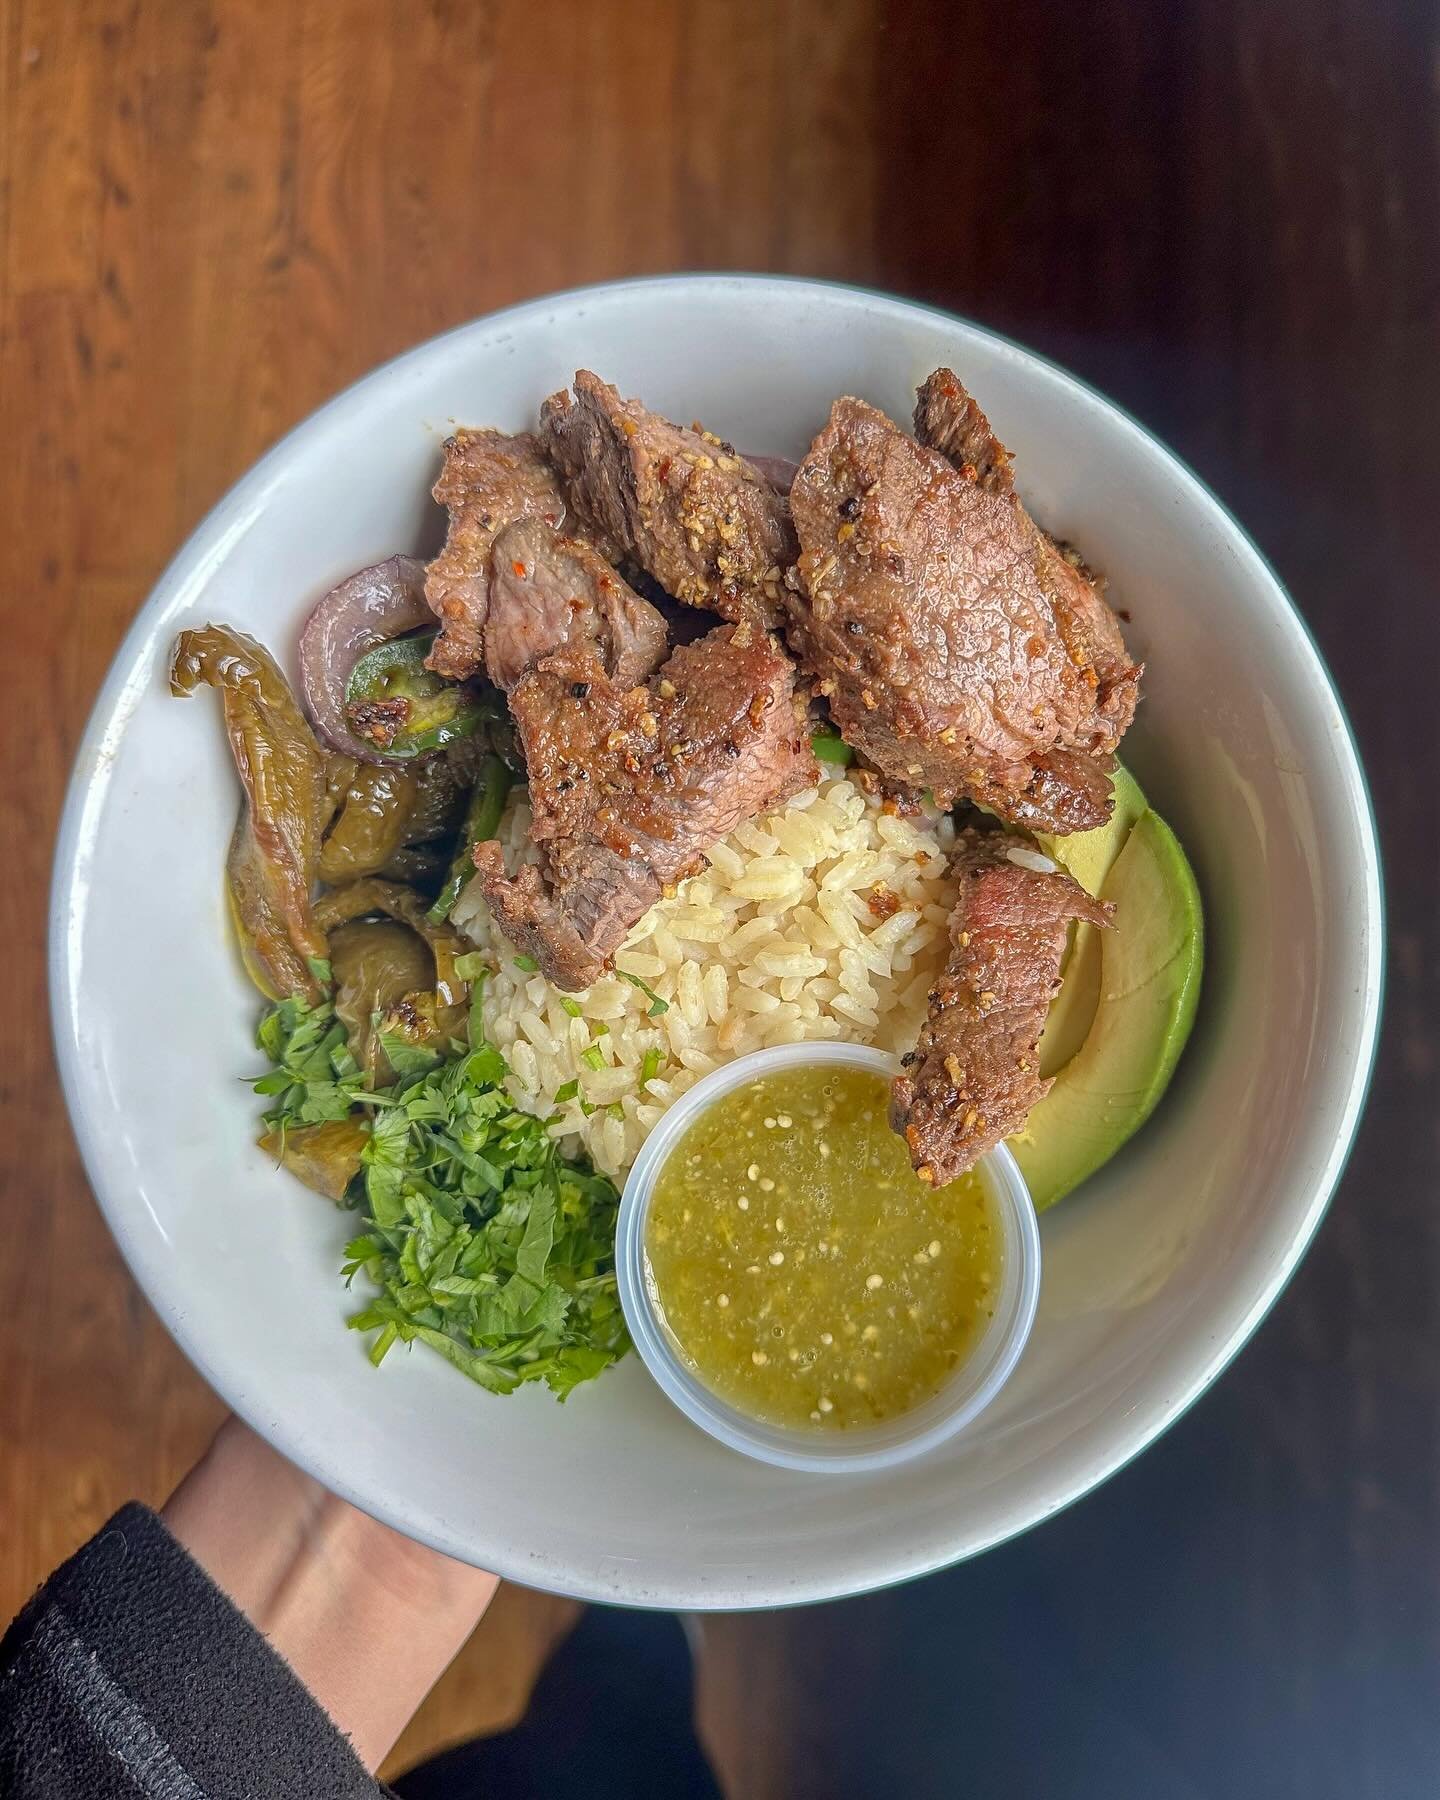 Spicing up our specials through Saturday: Our flank steak rice bowl &mdash; loaded with grilled flank steak, rice, saut&eacute;ed peppers &amp; onions, jalape&ntilde;os, avocado, fresh cilantro and our house-made salsa verde 🥩🔥 Oh and it&rsquo;s gl